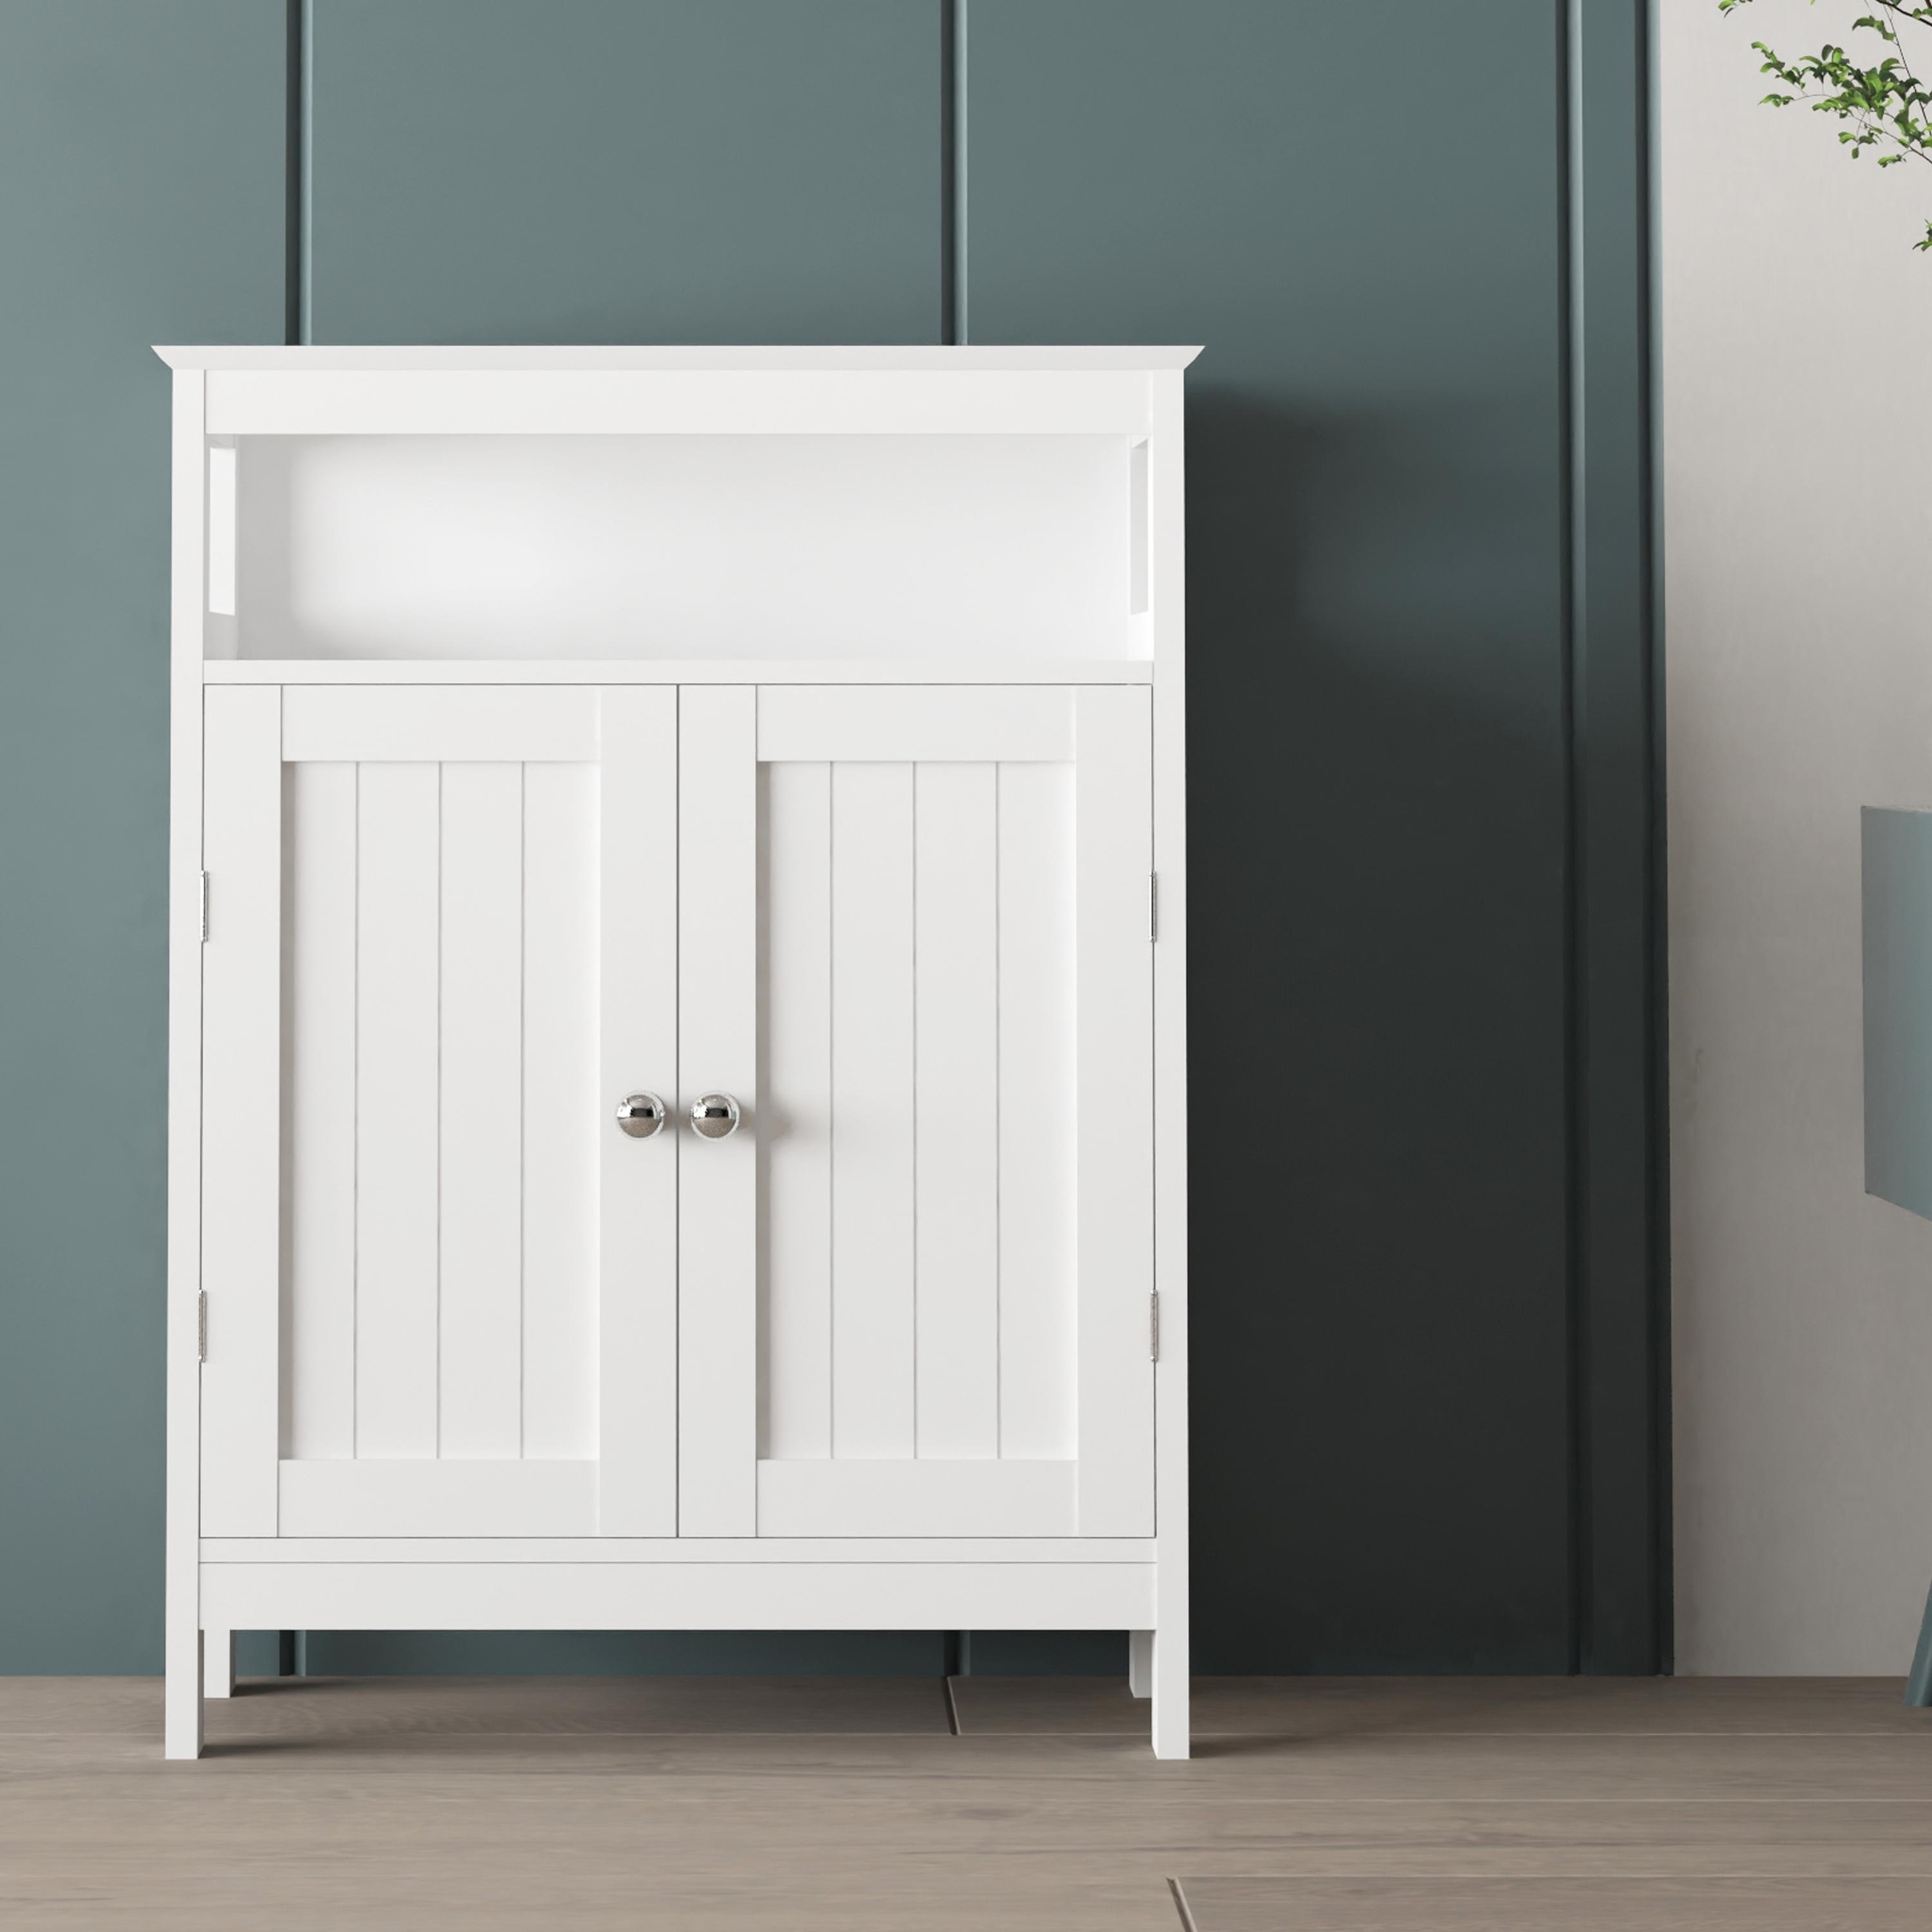 Wood Freestanding Bathroom Storage Cabinet with Double Shutter